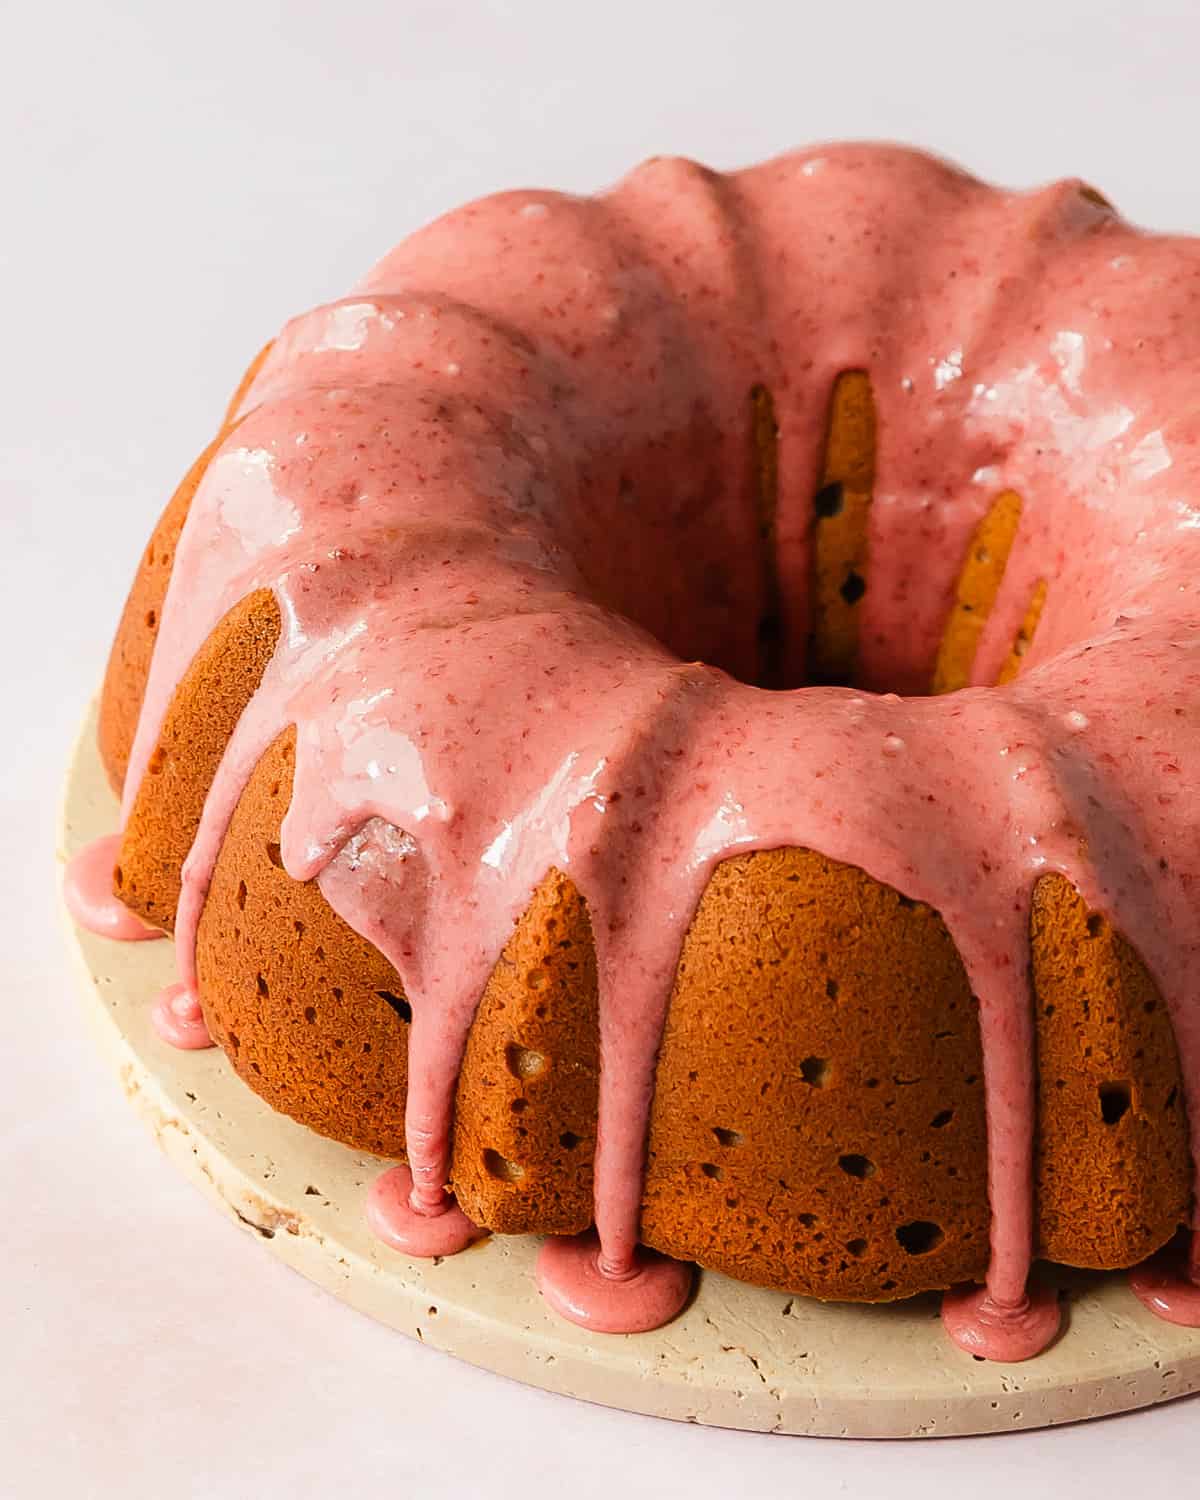 Strawberry pound cake is a buttery, moist, dense and tender pound cake made with fresh strawberries. Top with this pound cake with fresh strawberries with a sweet and creamy fresh strawberry icing. Enjoy this easy to make, strawberry filled classic pound cake for breakfast, brunch or dessert. 